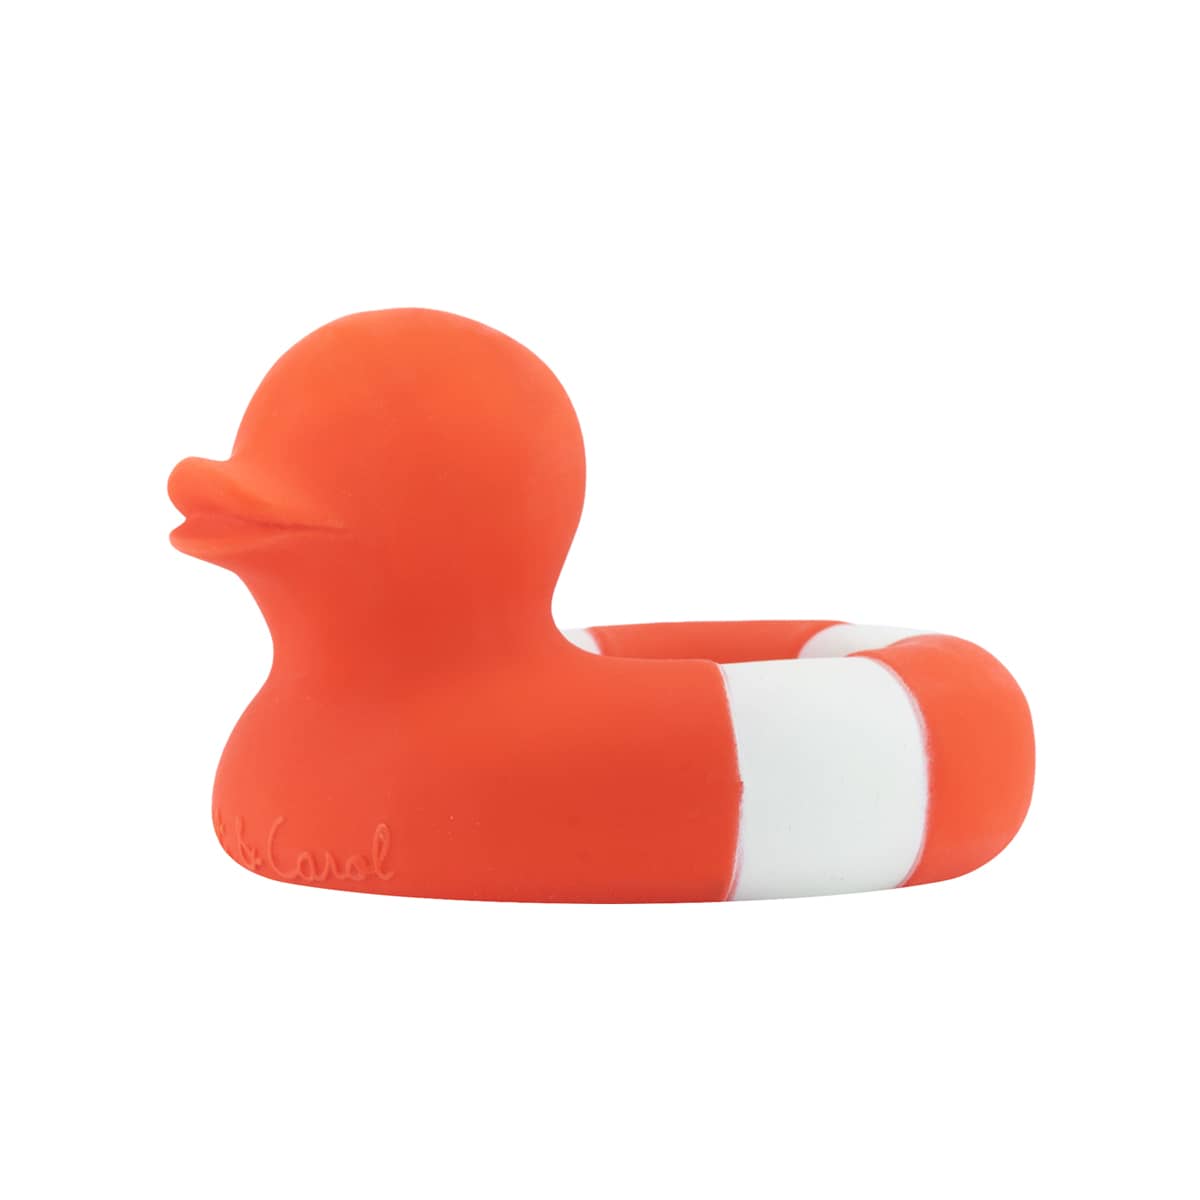 Oli & Carol Natural Rubber Flo the Floatie - Red